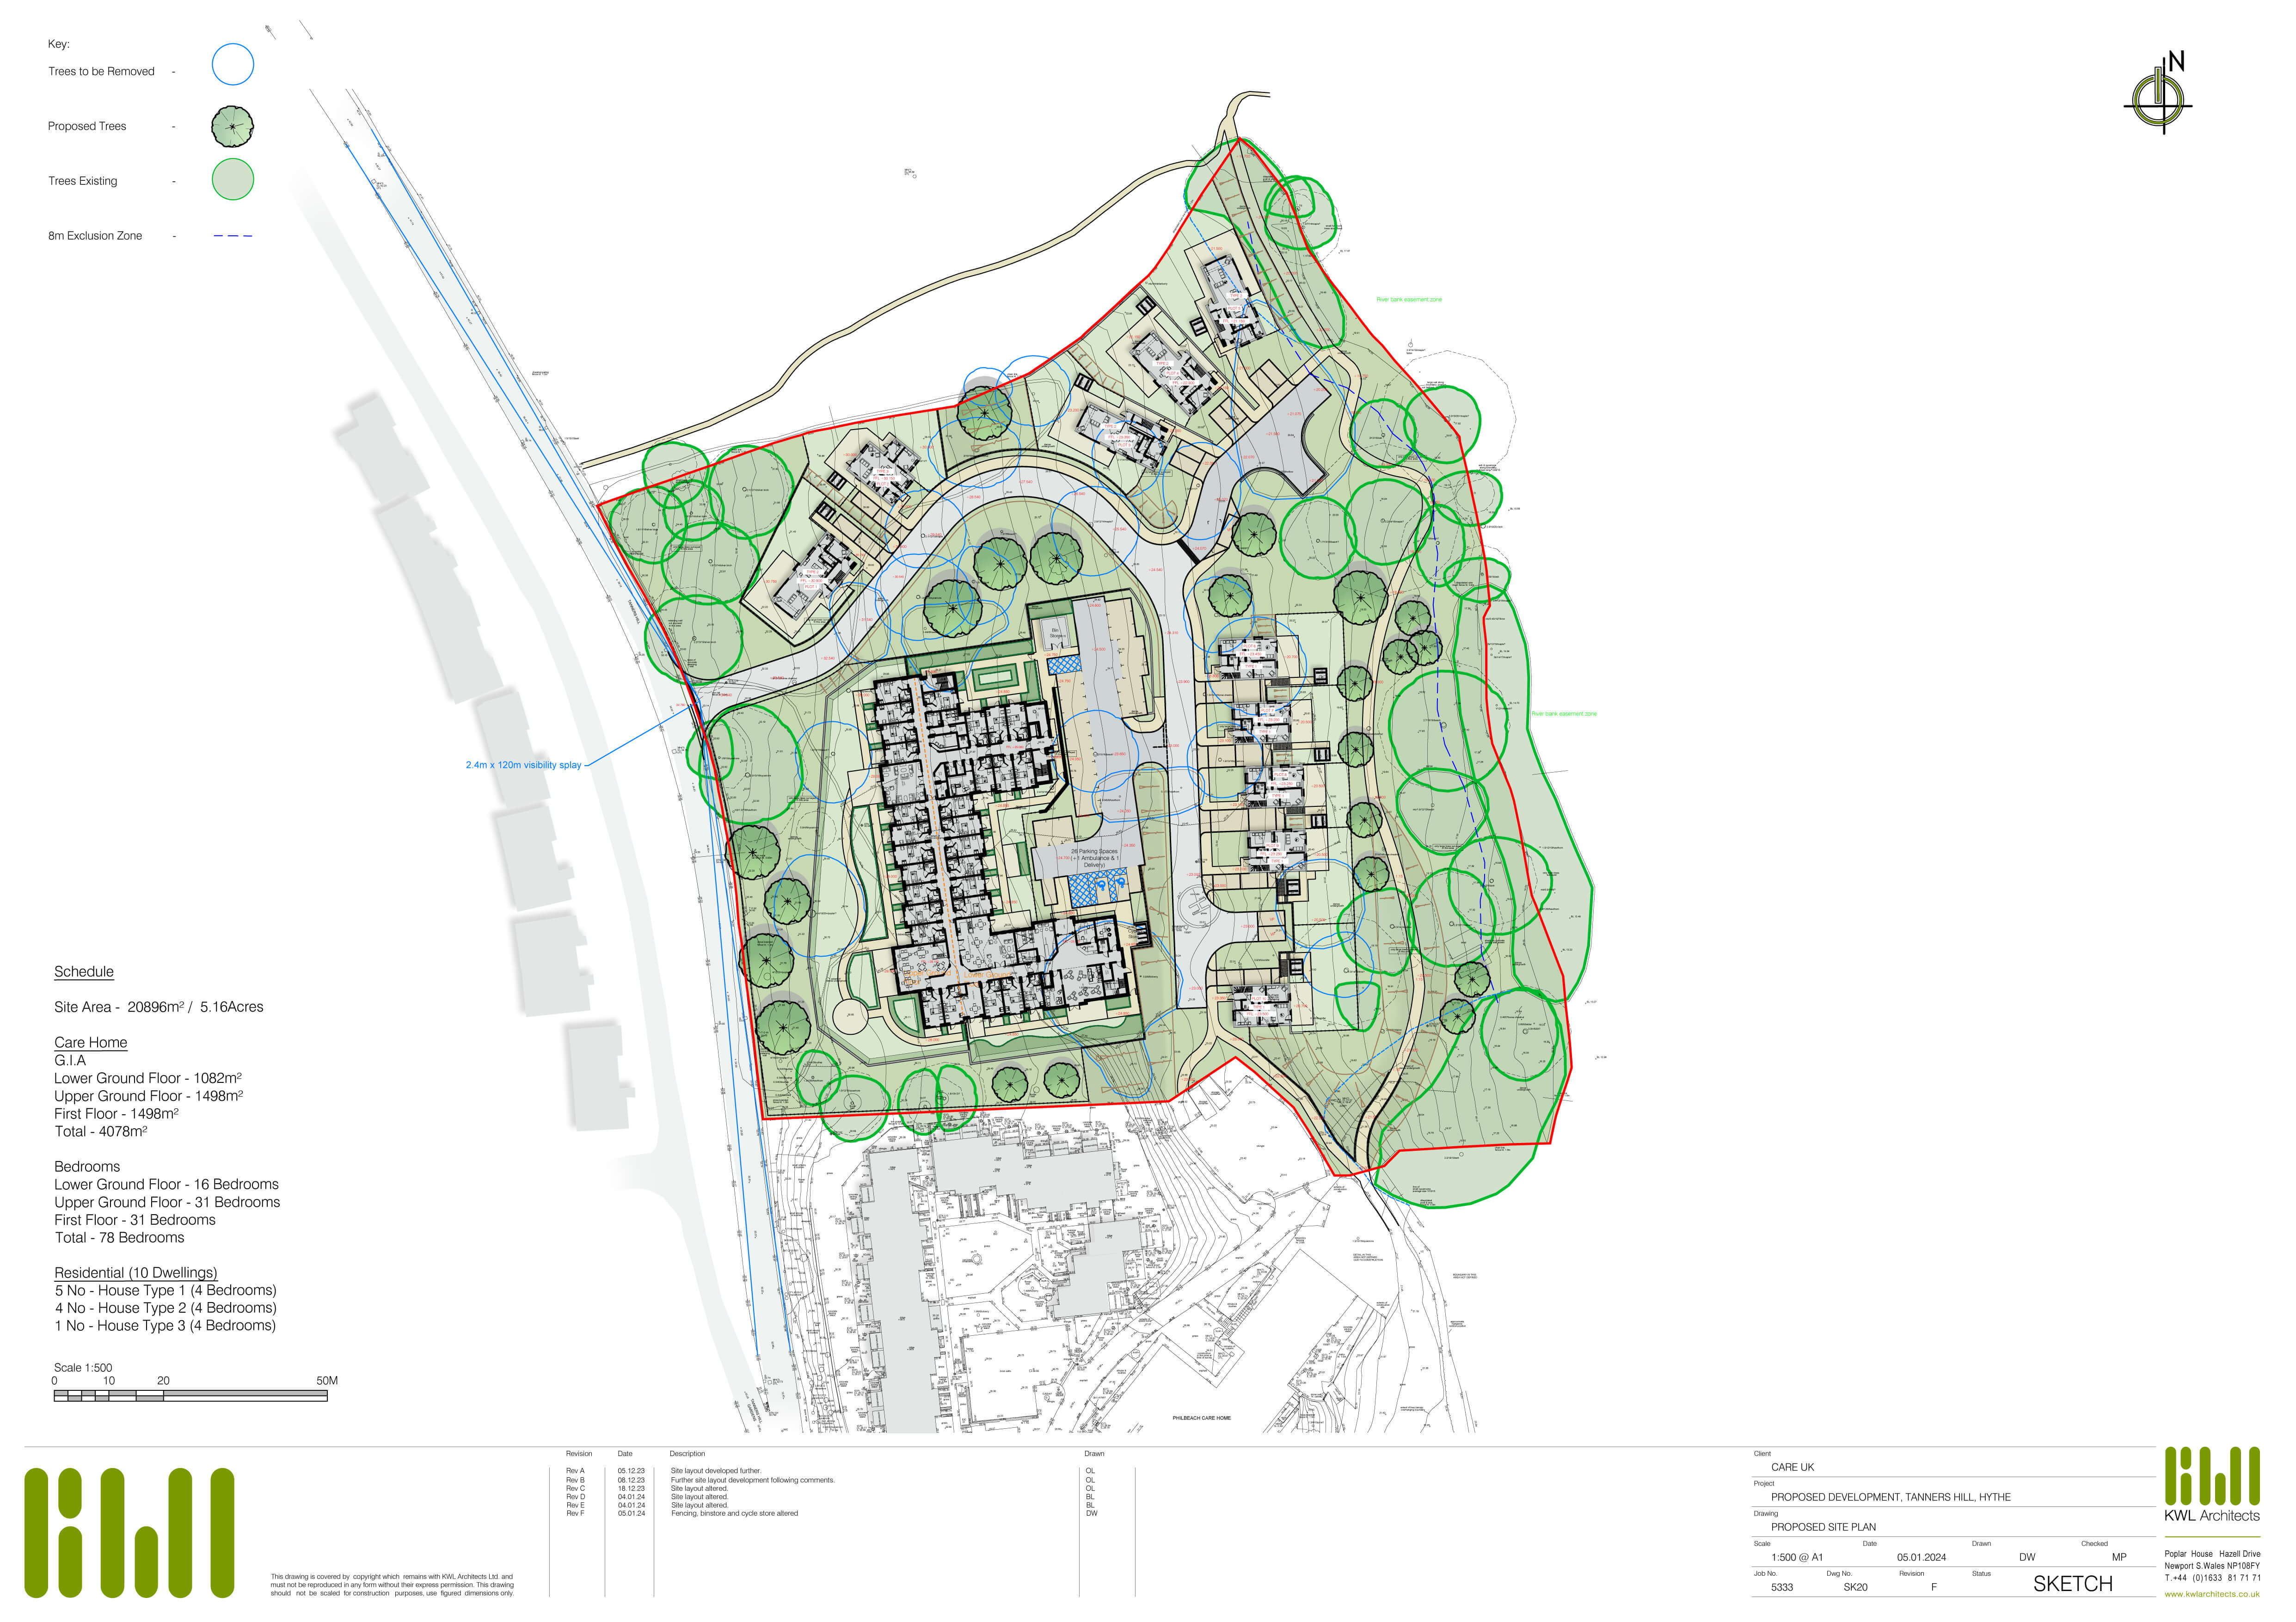 The site plan below shows the proposed layout